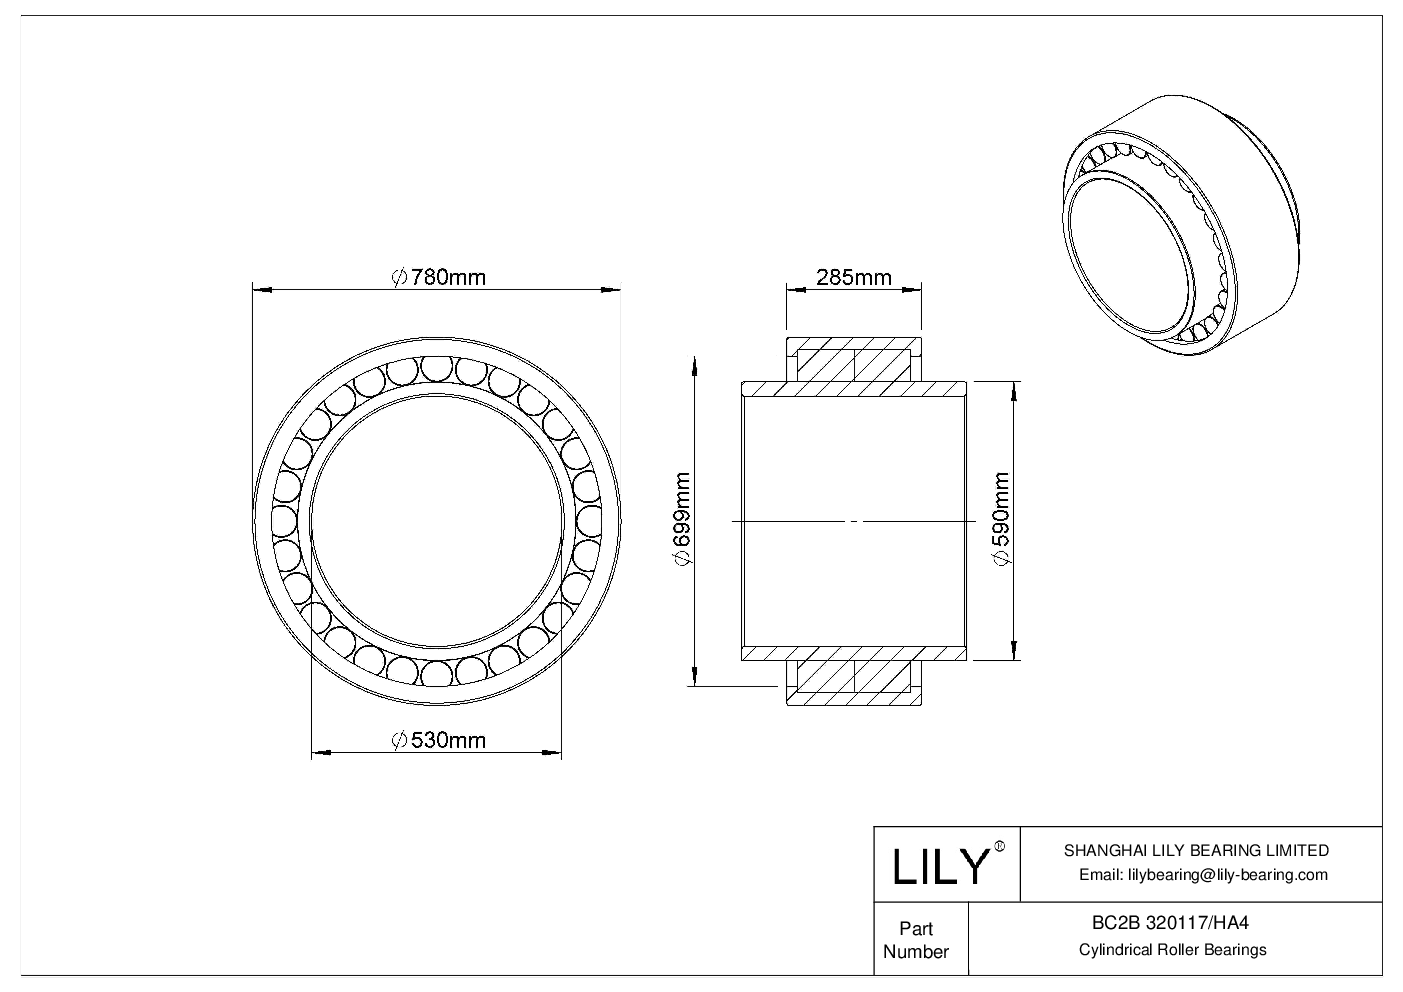 BC2B 320117/HA4 Double Row Cylindrical Roller Bearings cad drawing